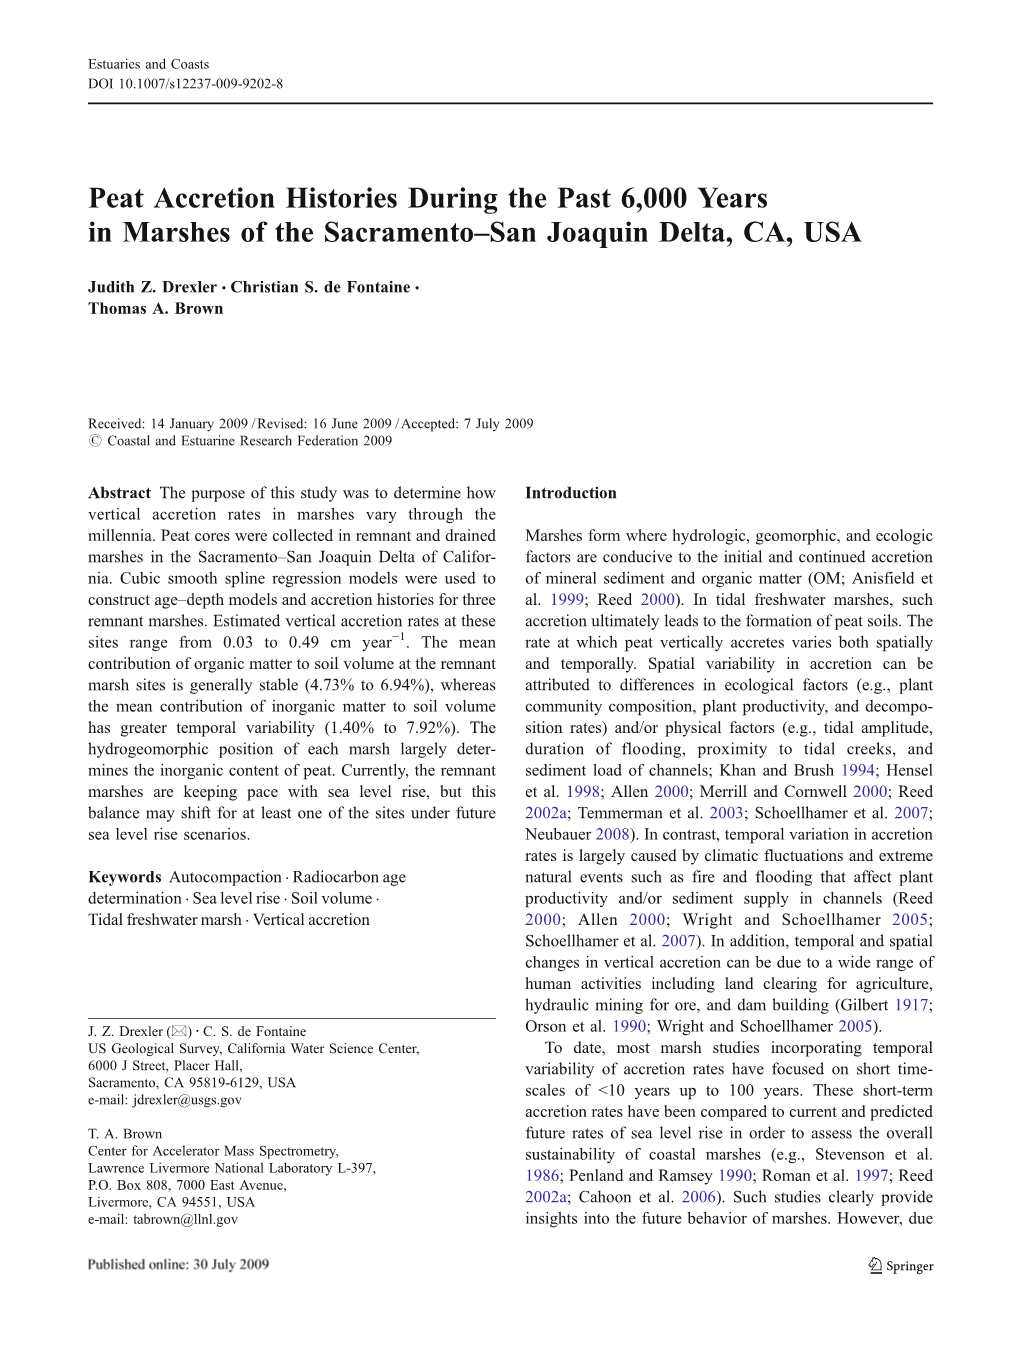 Peat Accretion Histories During the Past 6,000 Years in Marshes of the Sacramento–San Joaquin Delta, CA, USA